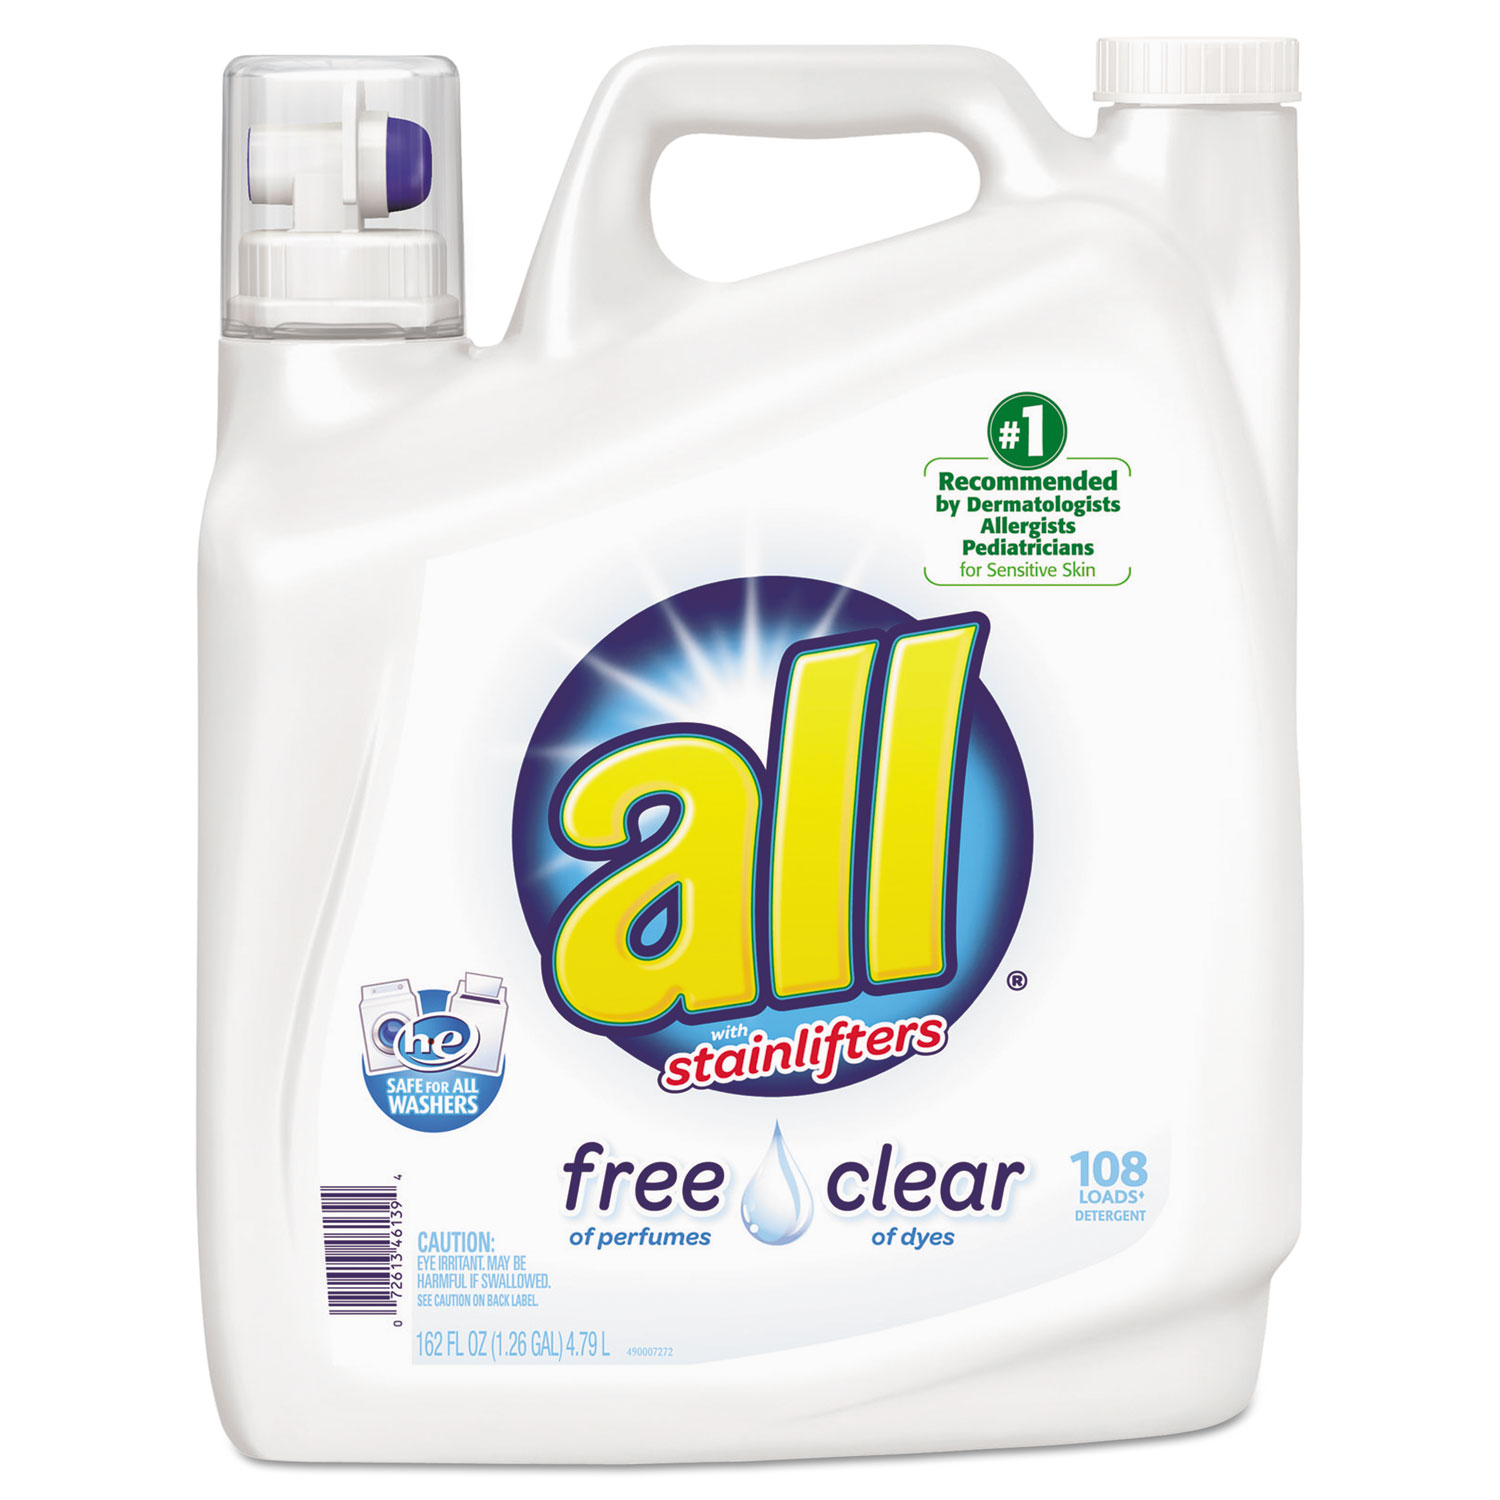  Diversey 46139 All Free Clear 2x Liquid Laundry Detergent, Unscented, 162 oz Bottle, 2/Carton (DIA46139) 